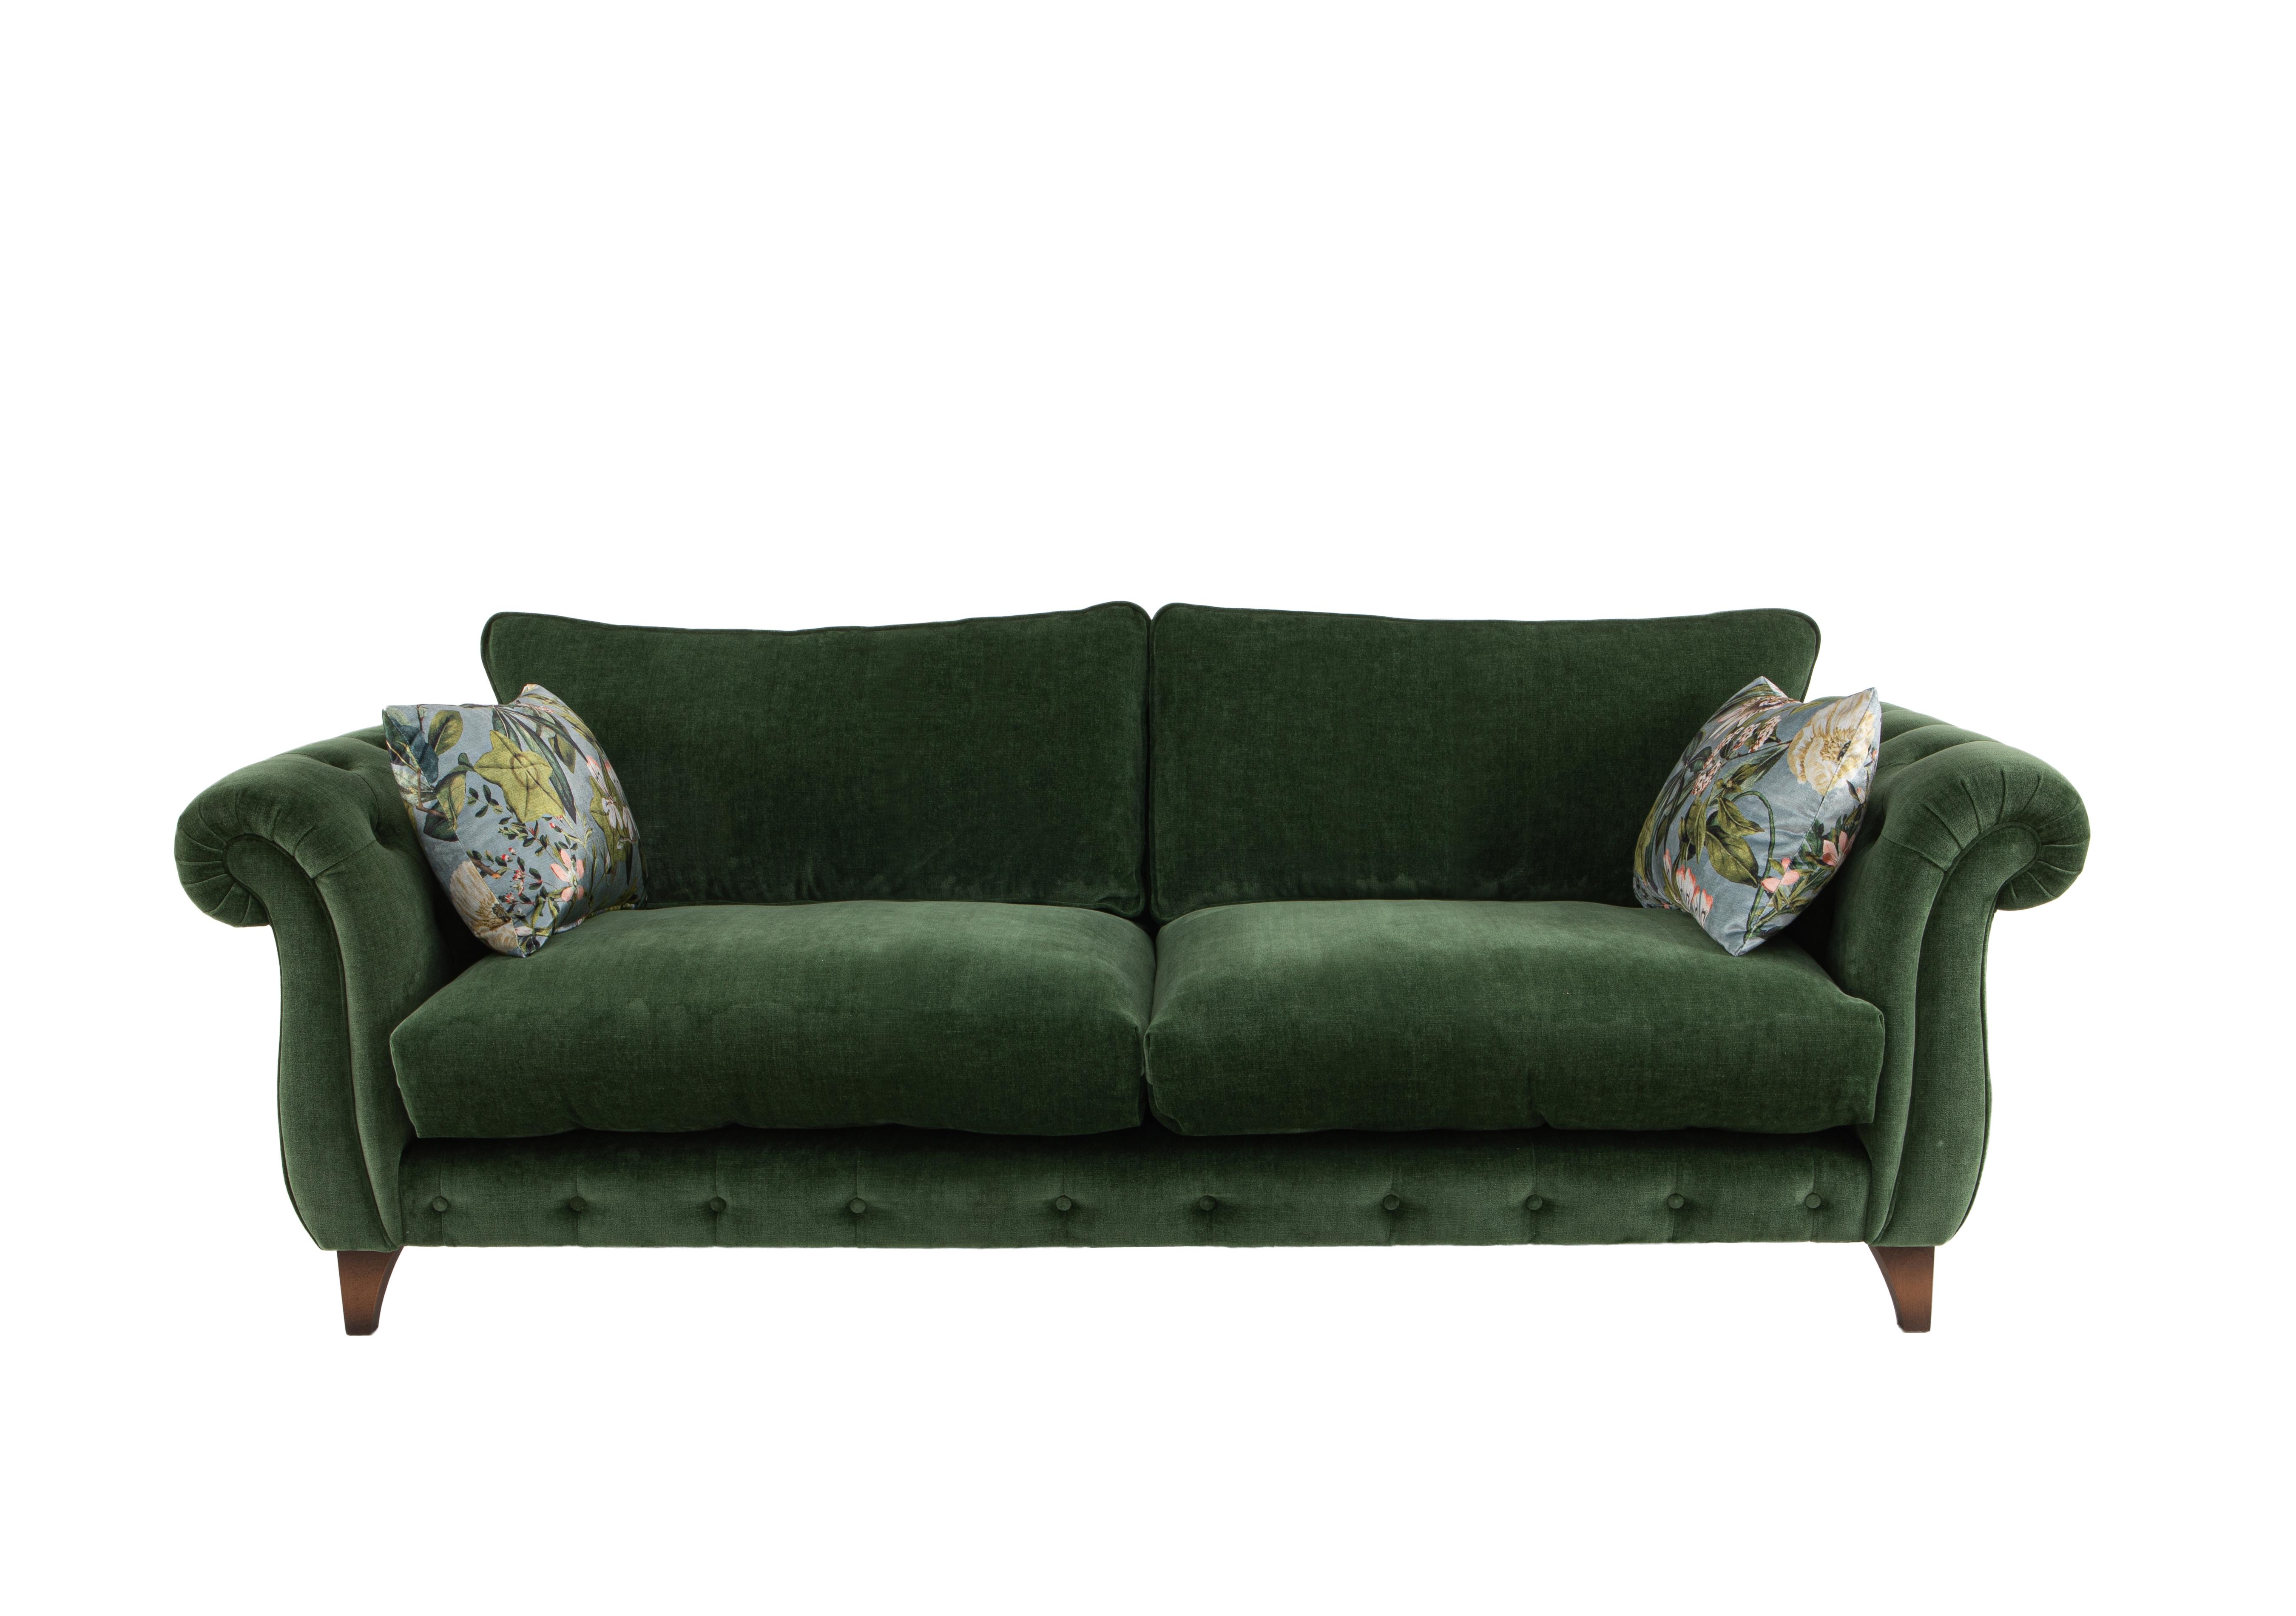 Boutique Palace Fabric 3 Seater Classic Back Sofa in Oasis Parrot on Furniture Village